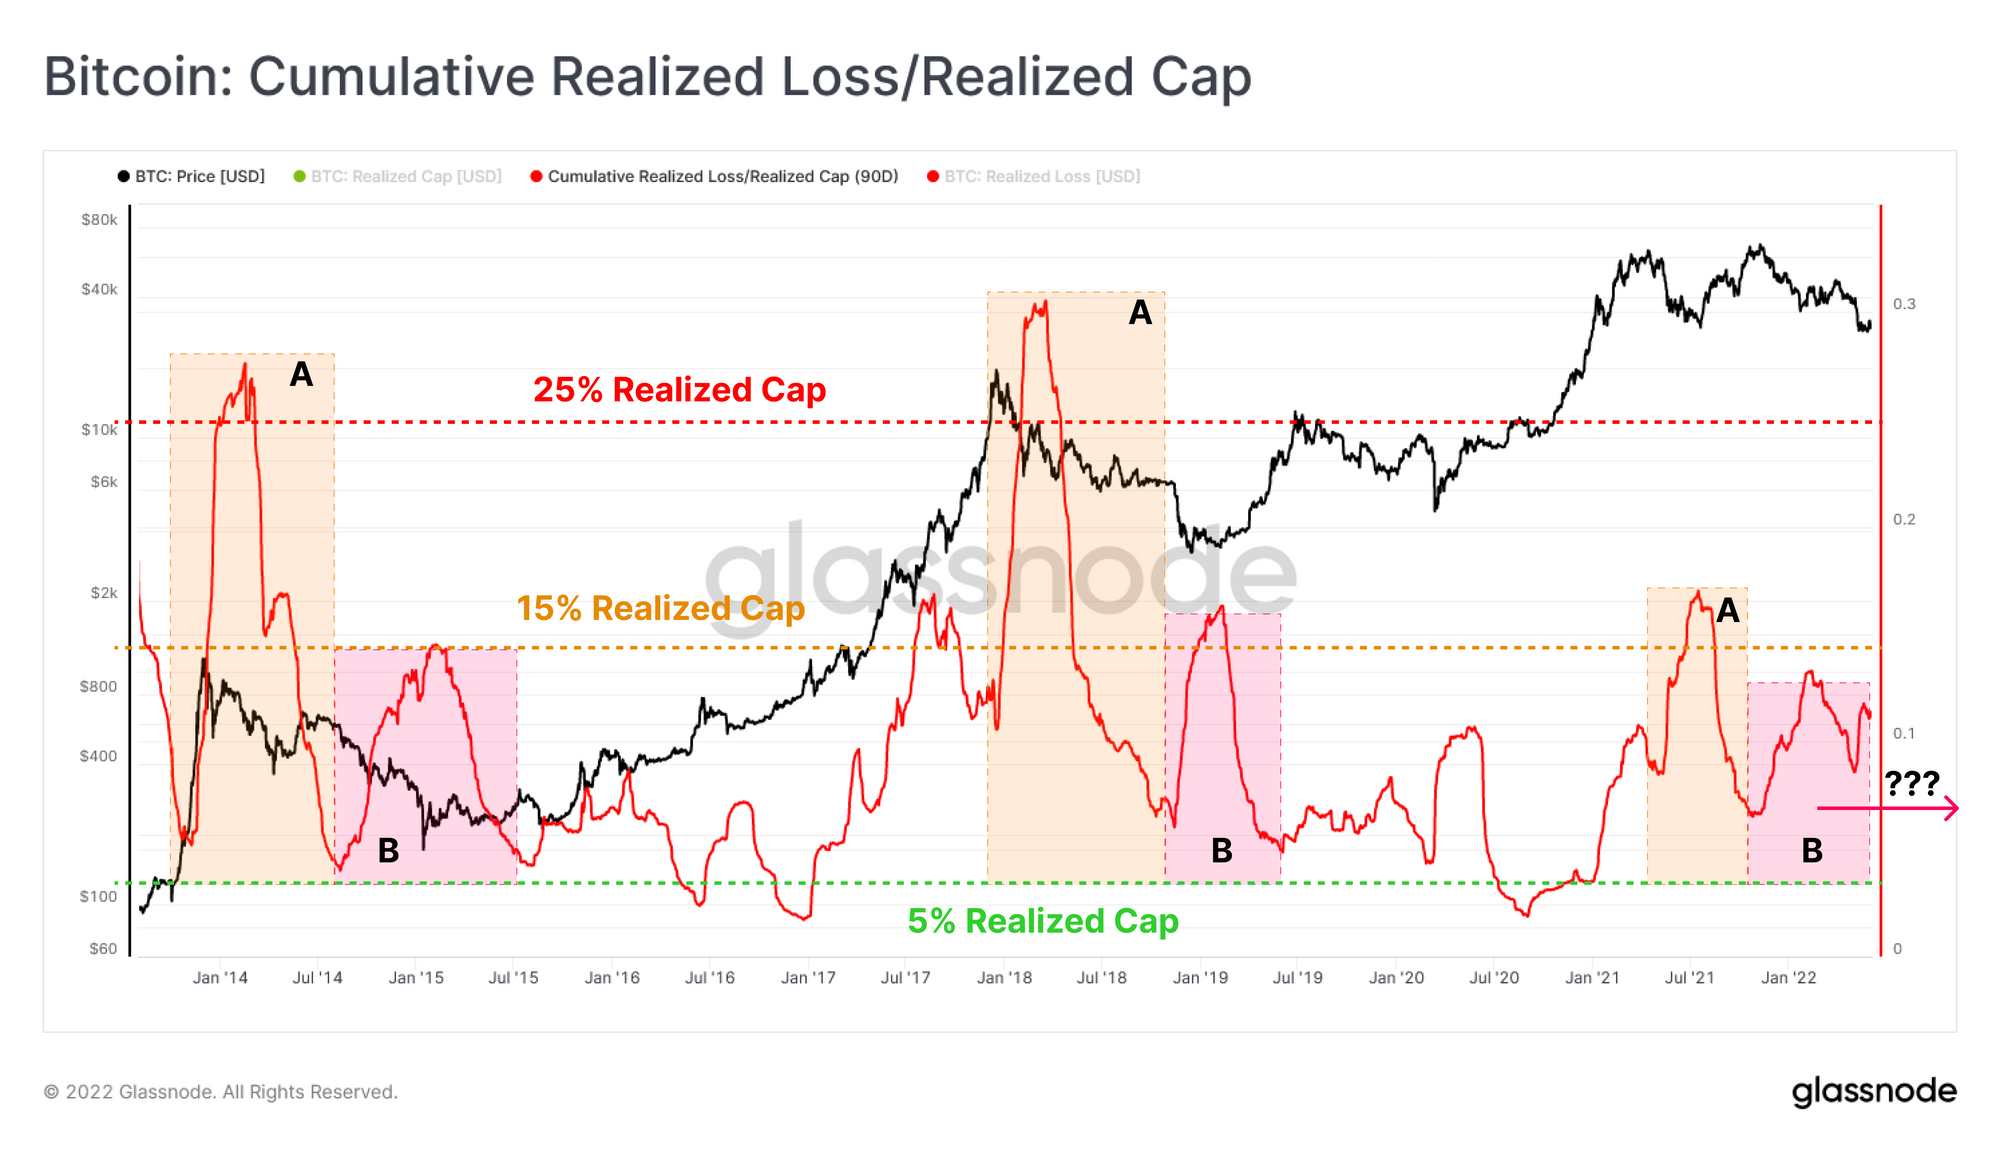 Bitcoin: Cumulative Realized Loss/Realized Cap